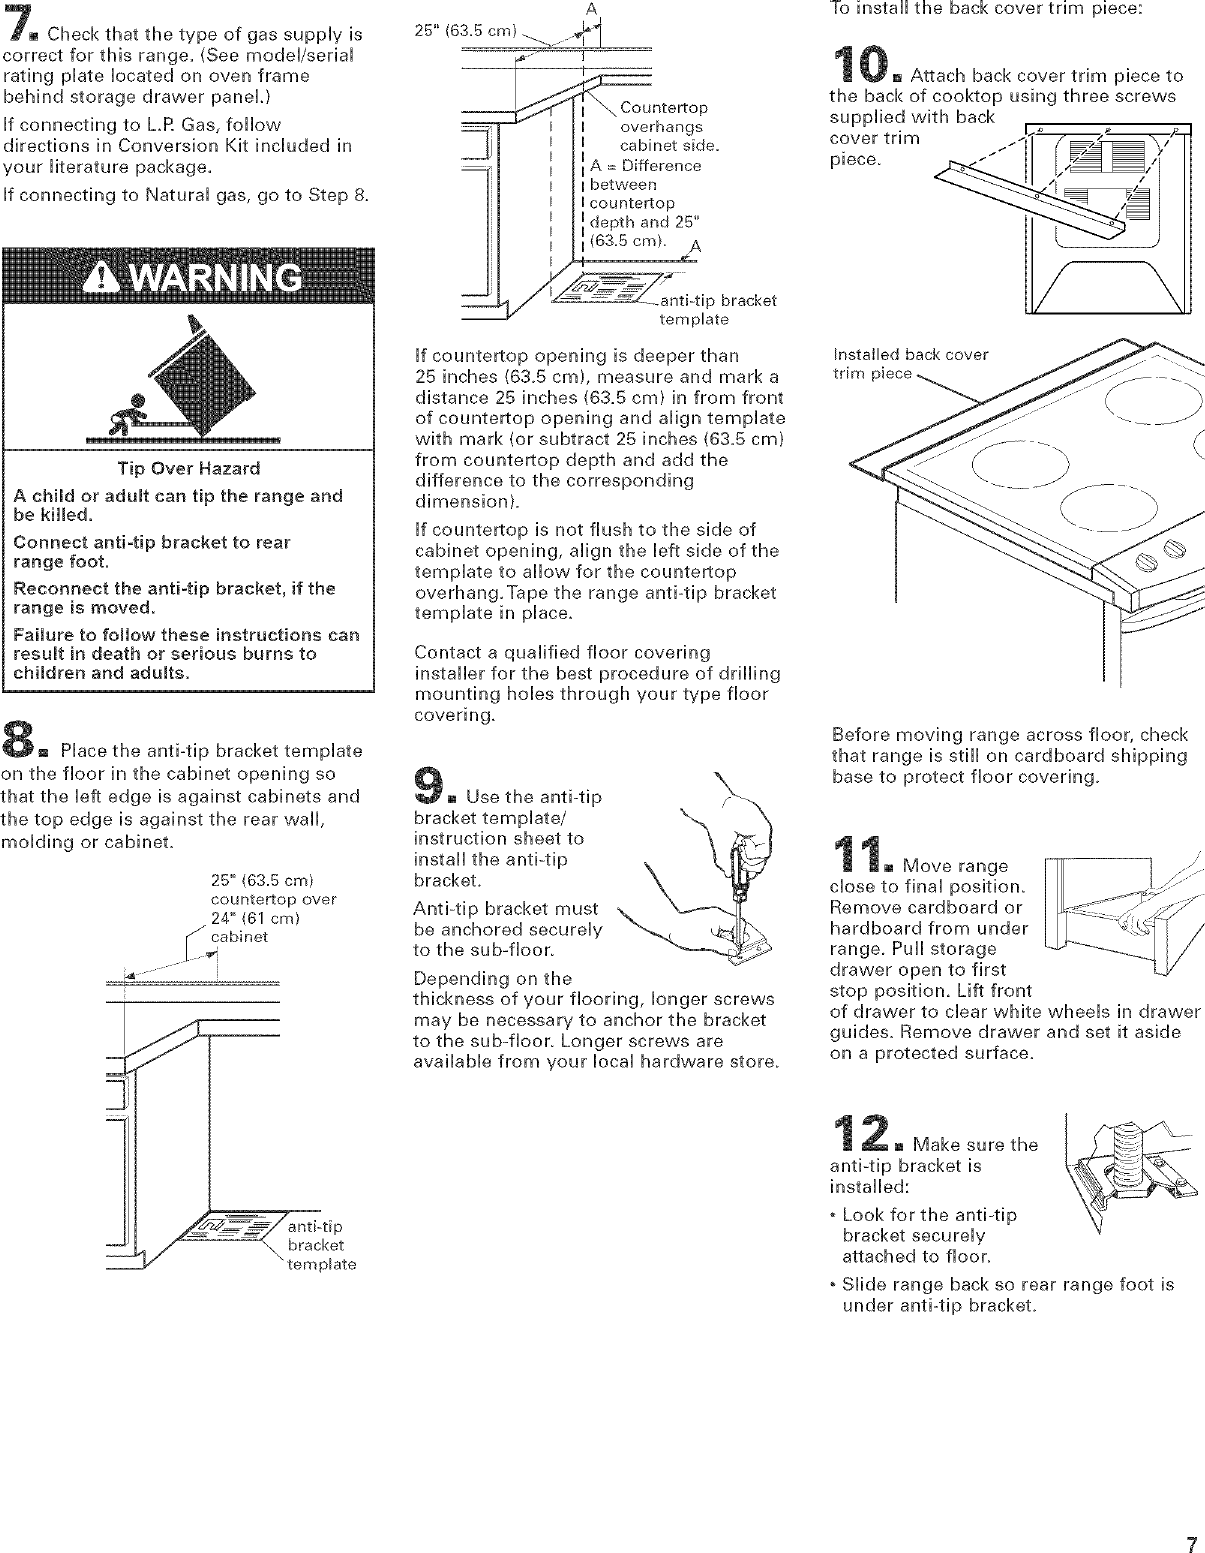 Page 7 of 10 - Whirlpool GW395LEGB6 User Manual  GAS RANGE - Manuals And Guides L0523245